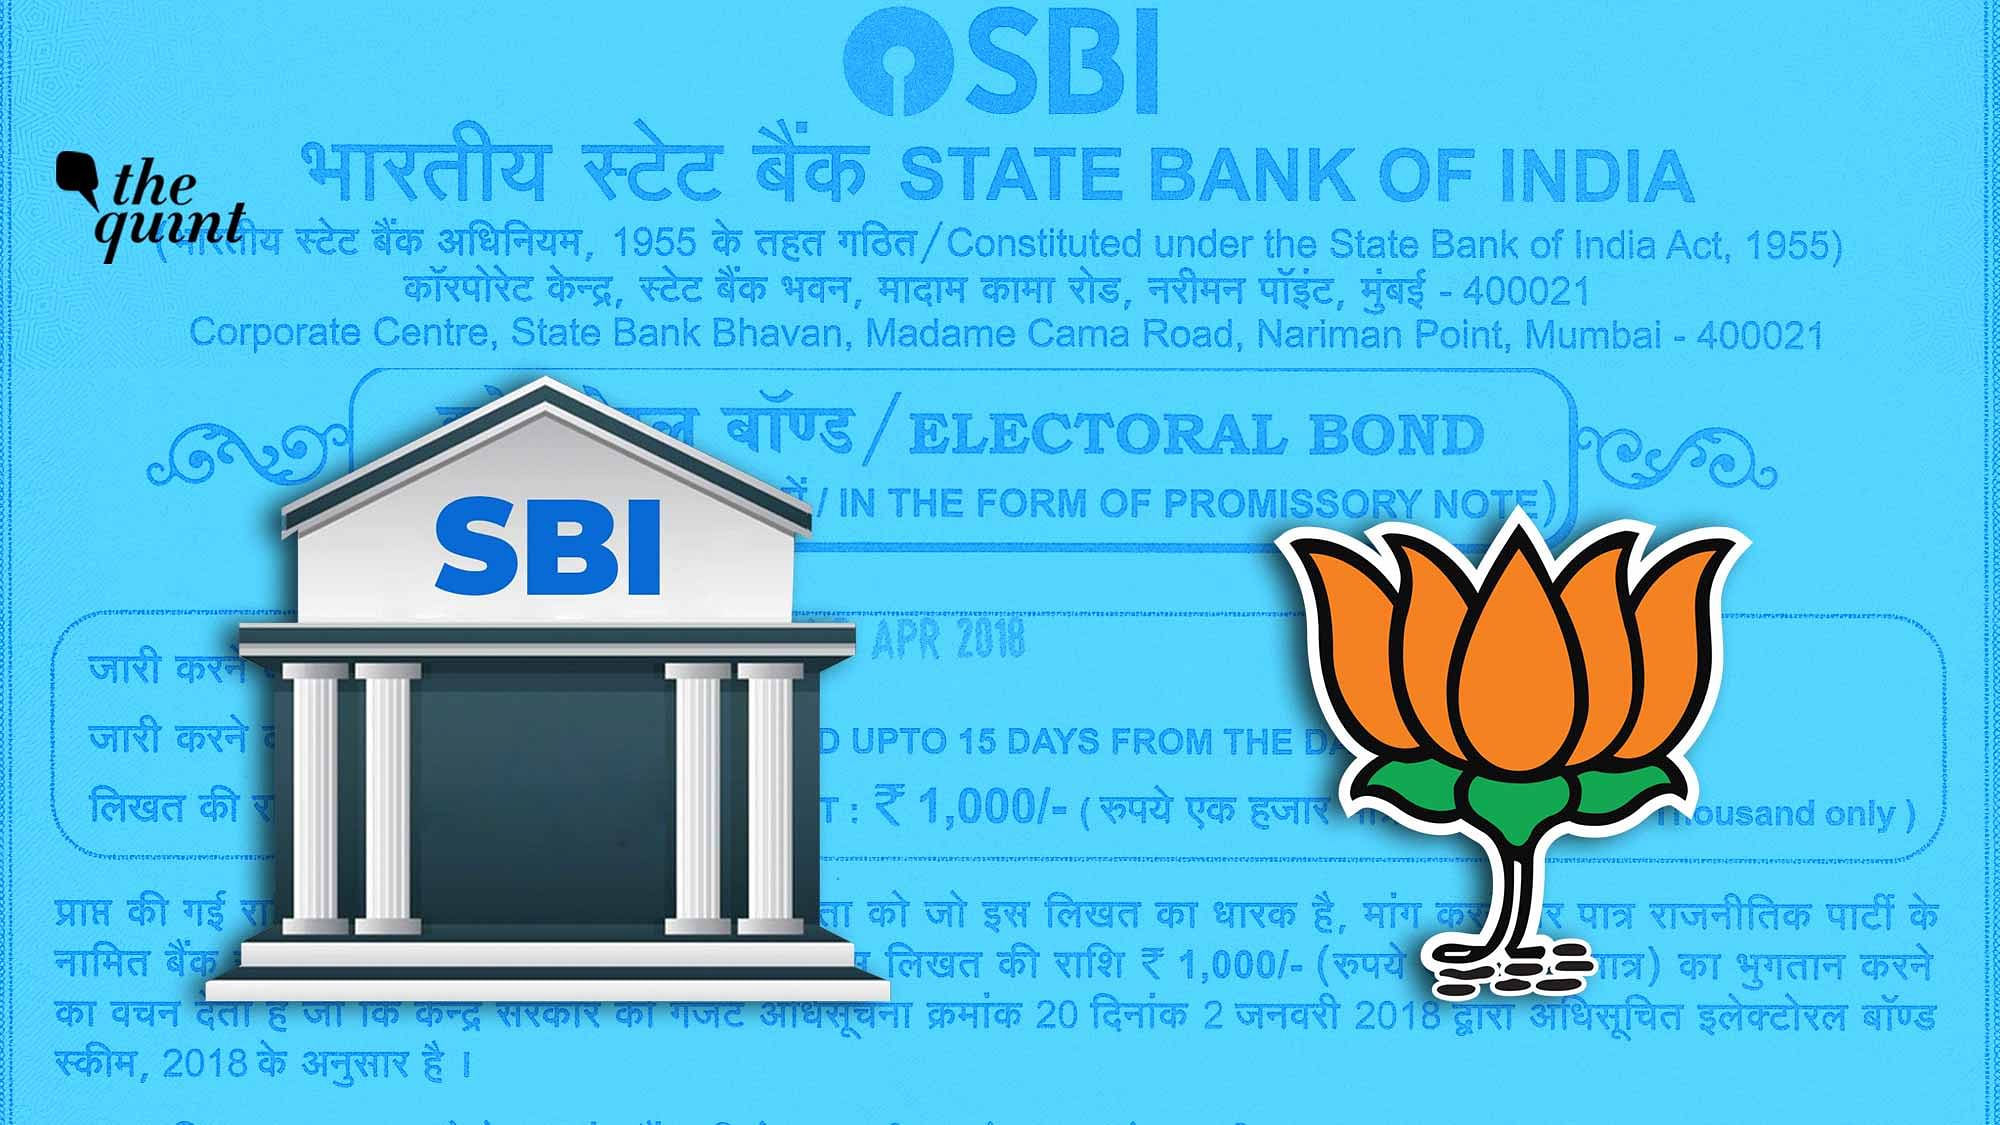 Bharatiya Janata Party (BJP) bagged 60% of the total electoral bonds sold in two Financial Years reveals the annual audit report.&nbsp;